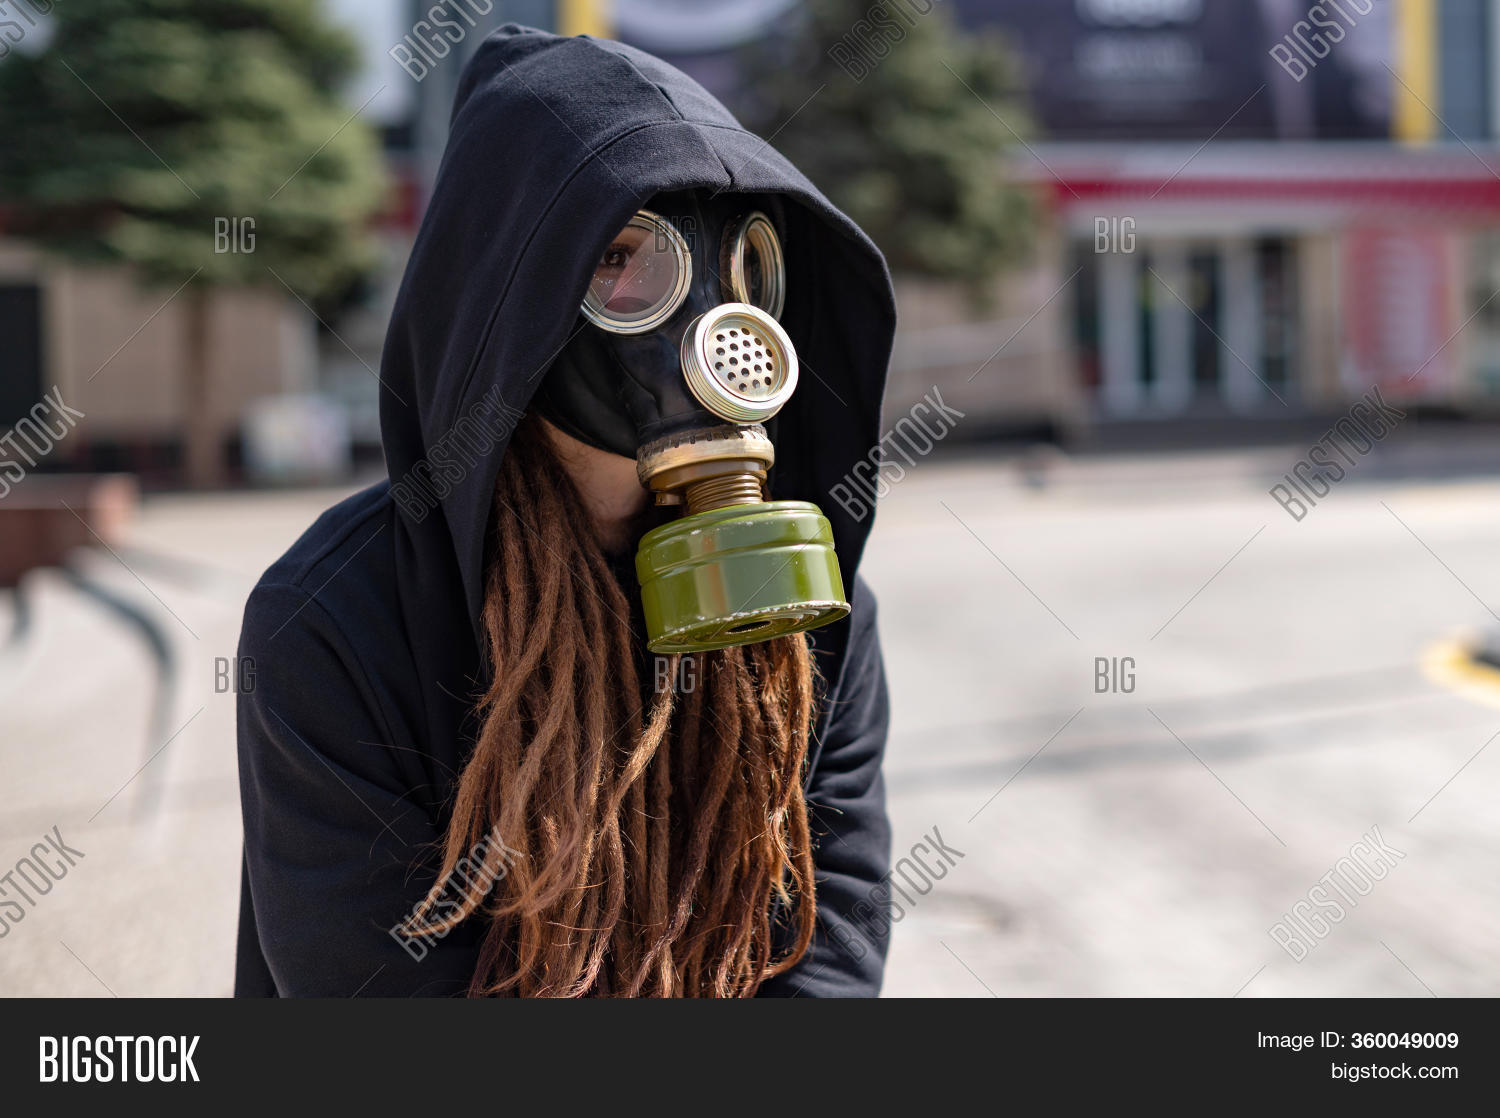 darwin finches recommends girls wearing gas masks pic